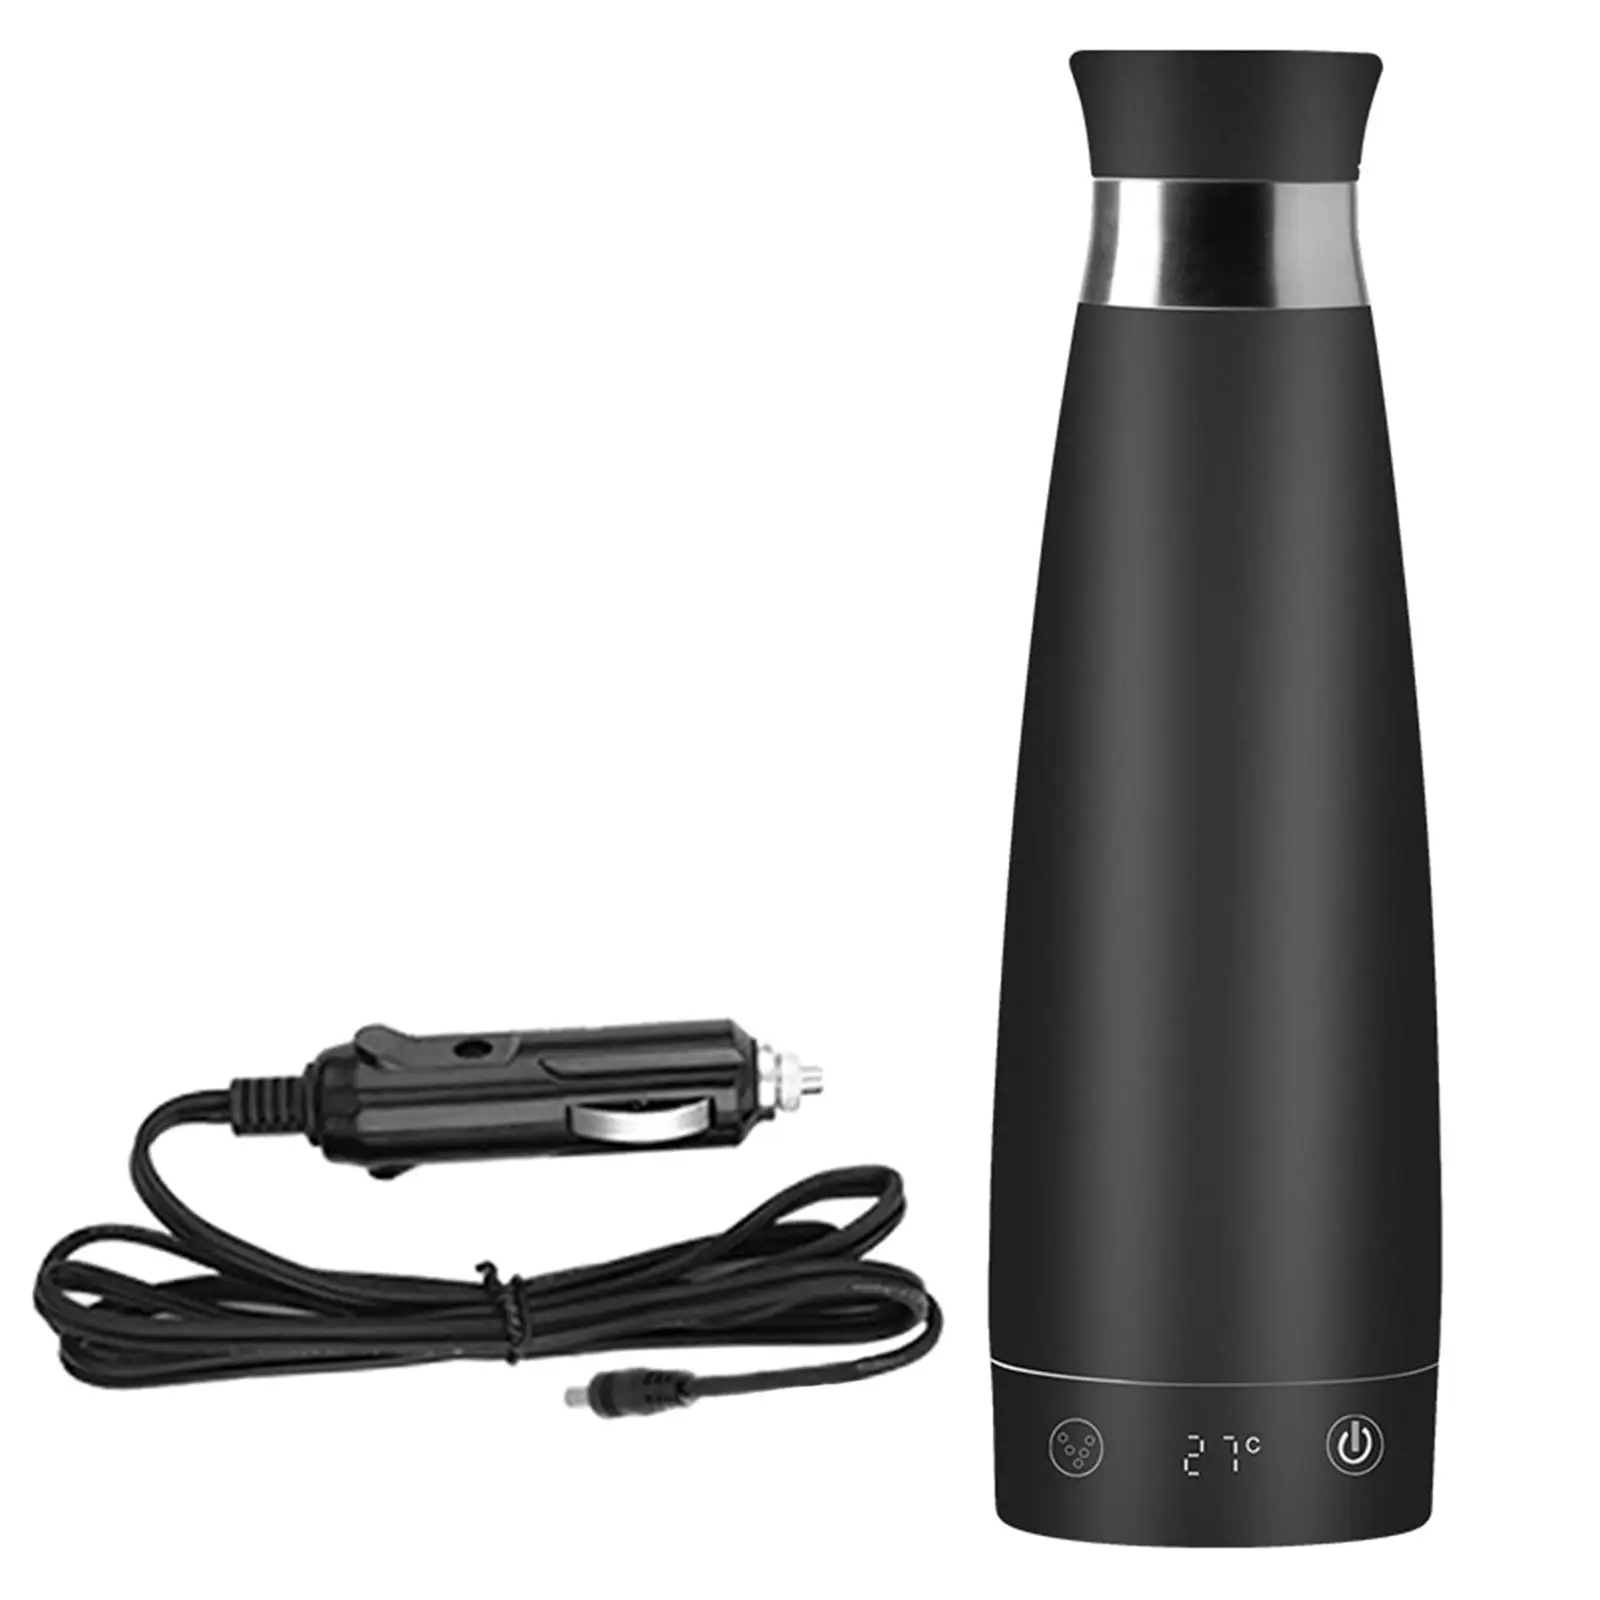 Travel Water Cup Portable Temperature Control Multifunction Stainless Steel Heated 12V Universal Heating Bottle for Milk